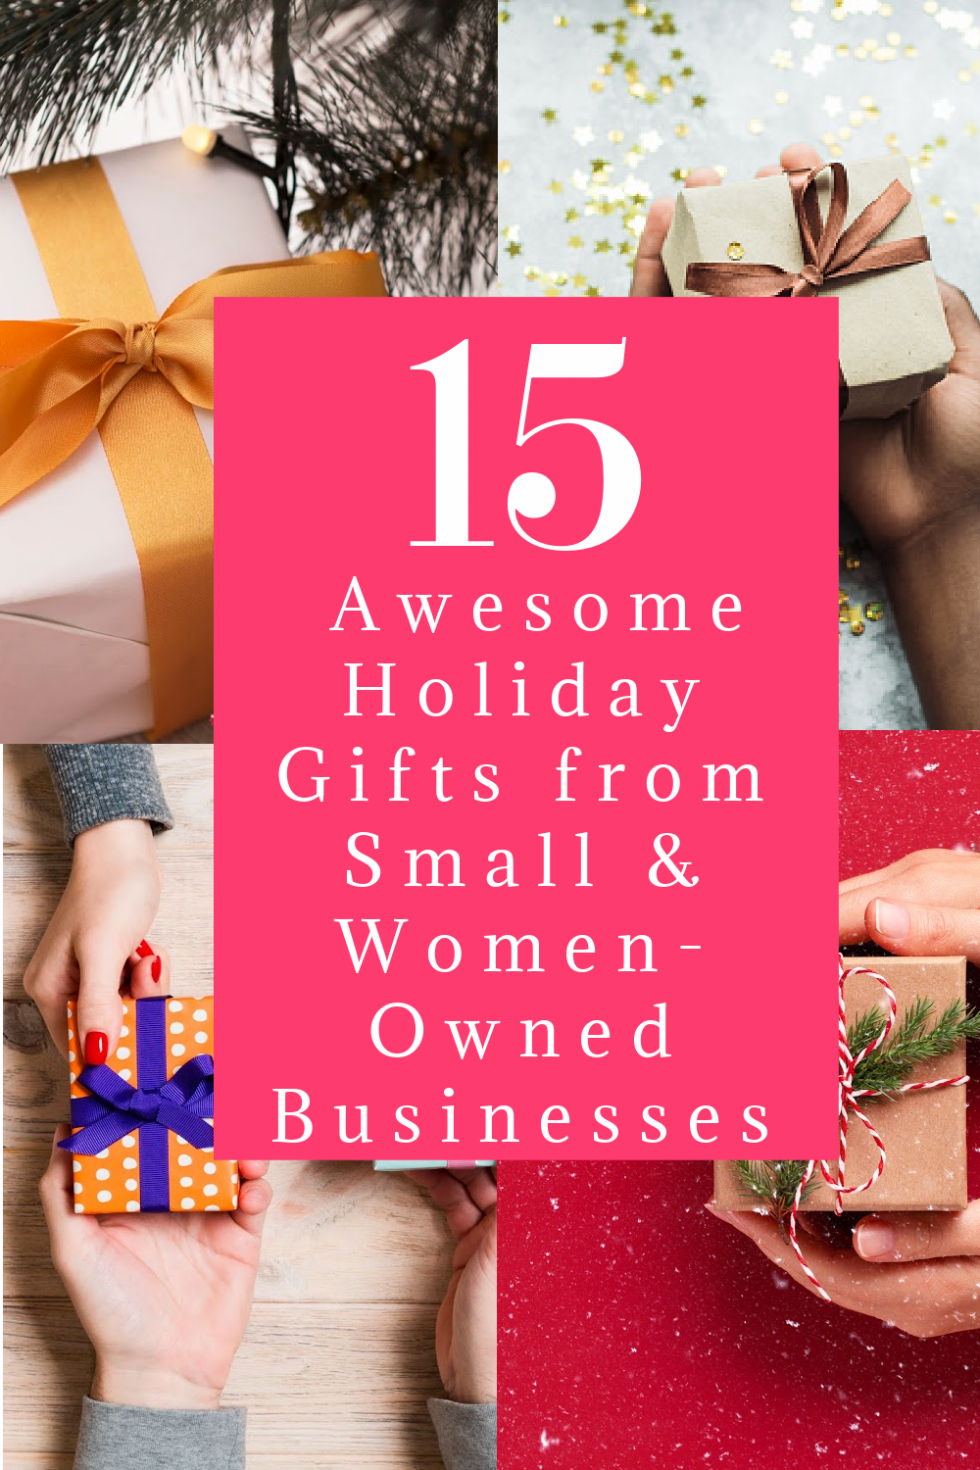 16 Awesome Holiday Gifts From Small & Women-Owned Businesses | Pretty ...